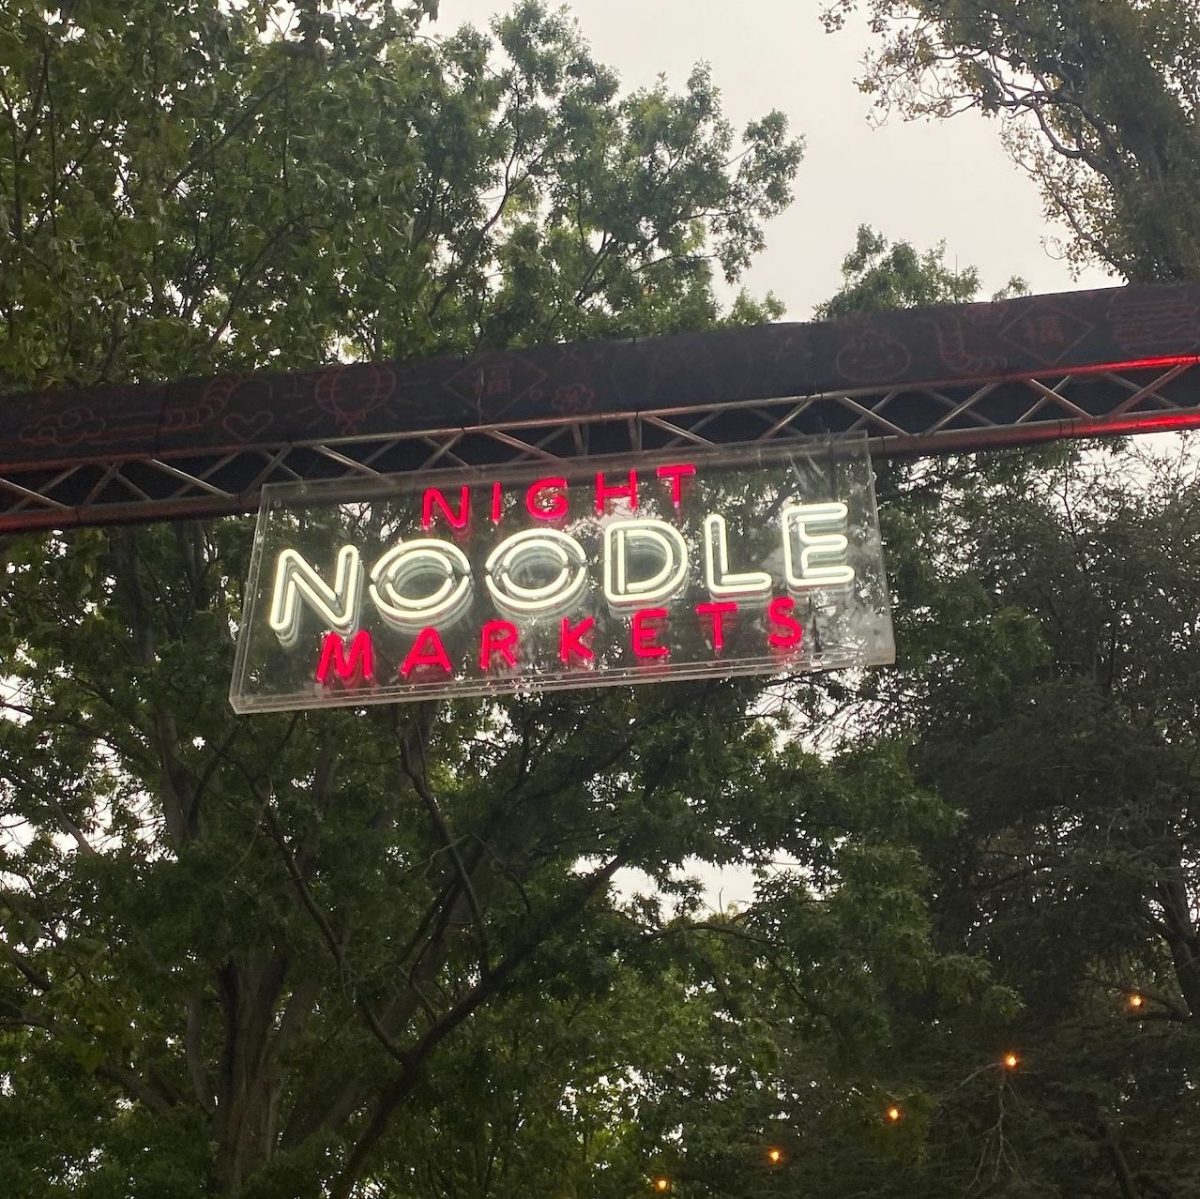 The entrance sign to the Night Noodle Markets in Canberra.